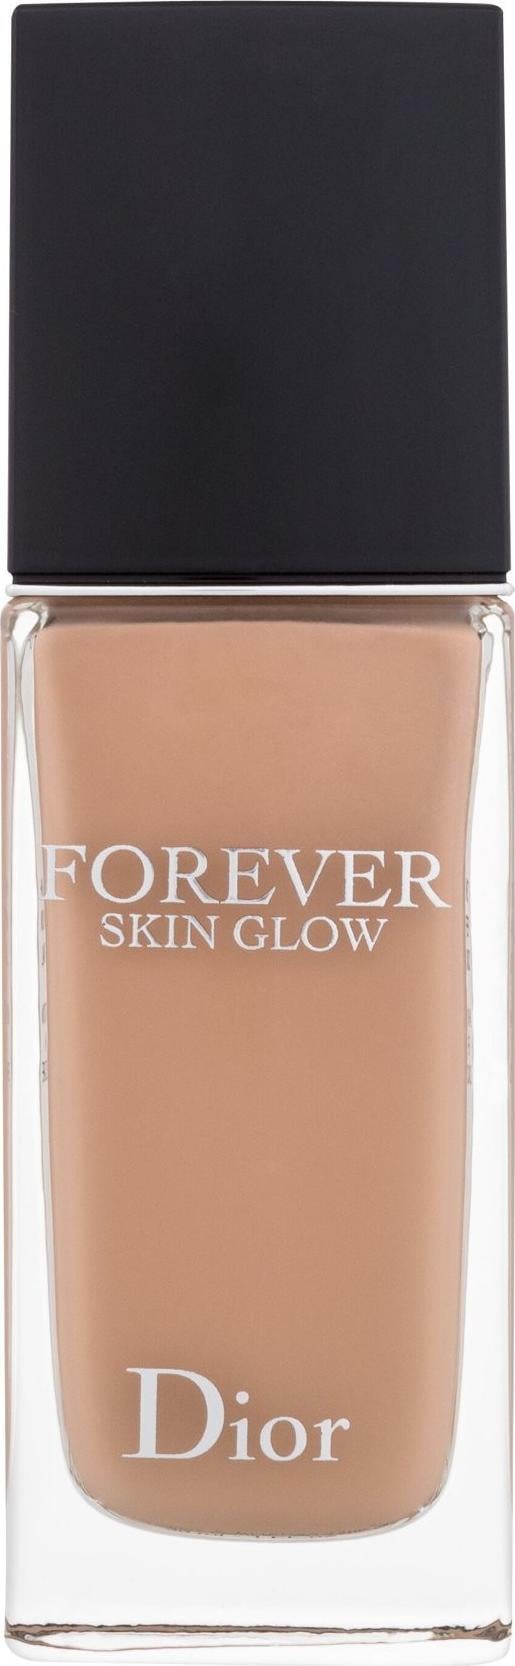 Dior Christian Dior Forever Skin Glow 24H Radiant Foundation SPF20 Foundation 30ml 3CR Cool Rosy